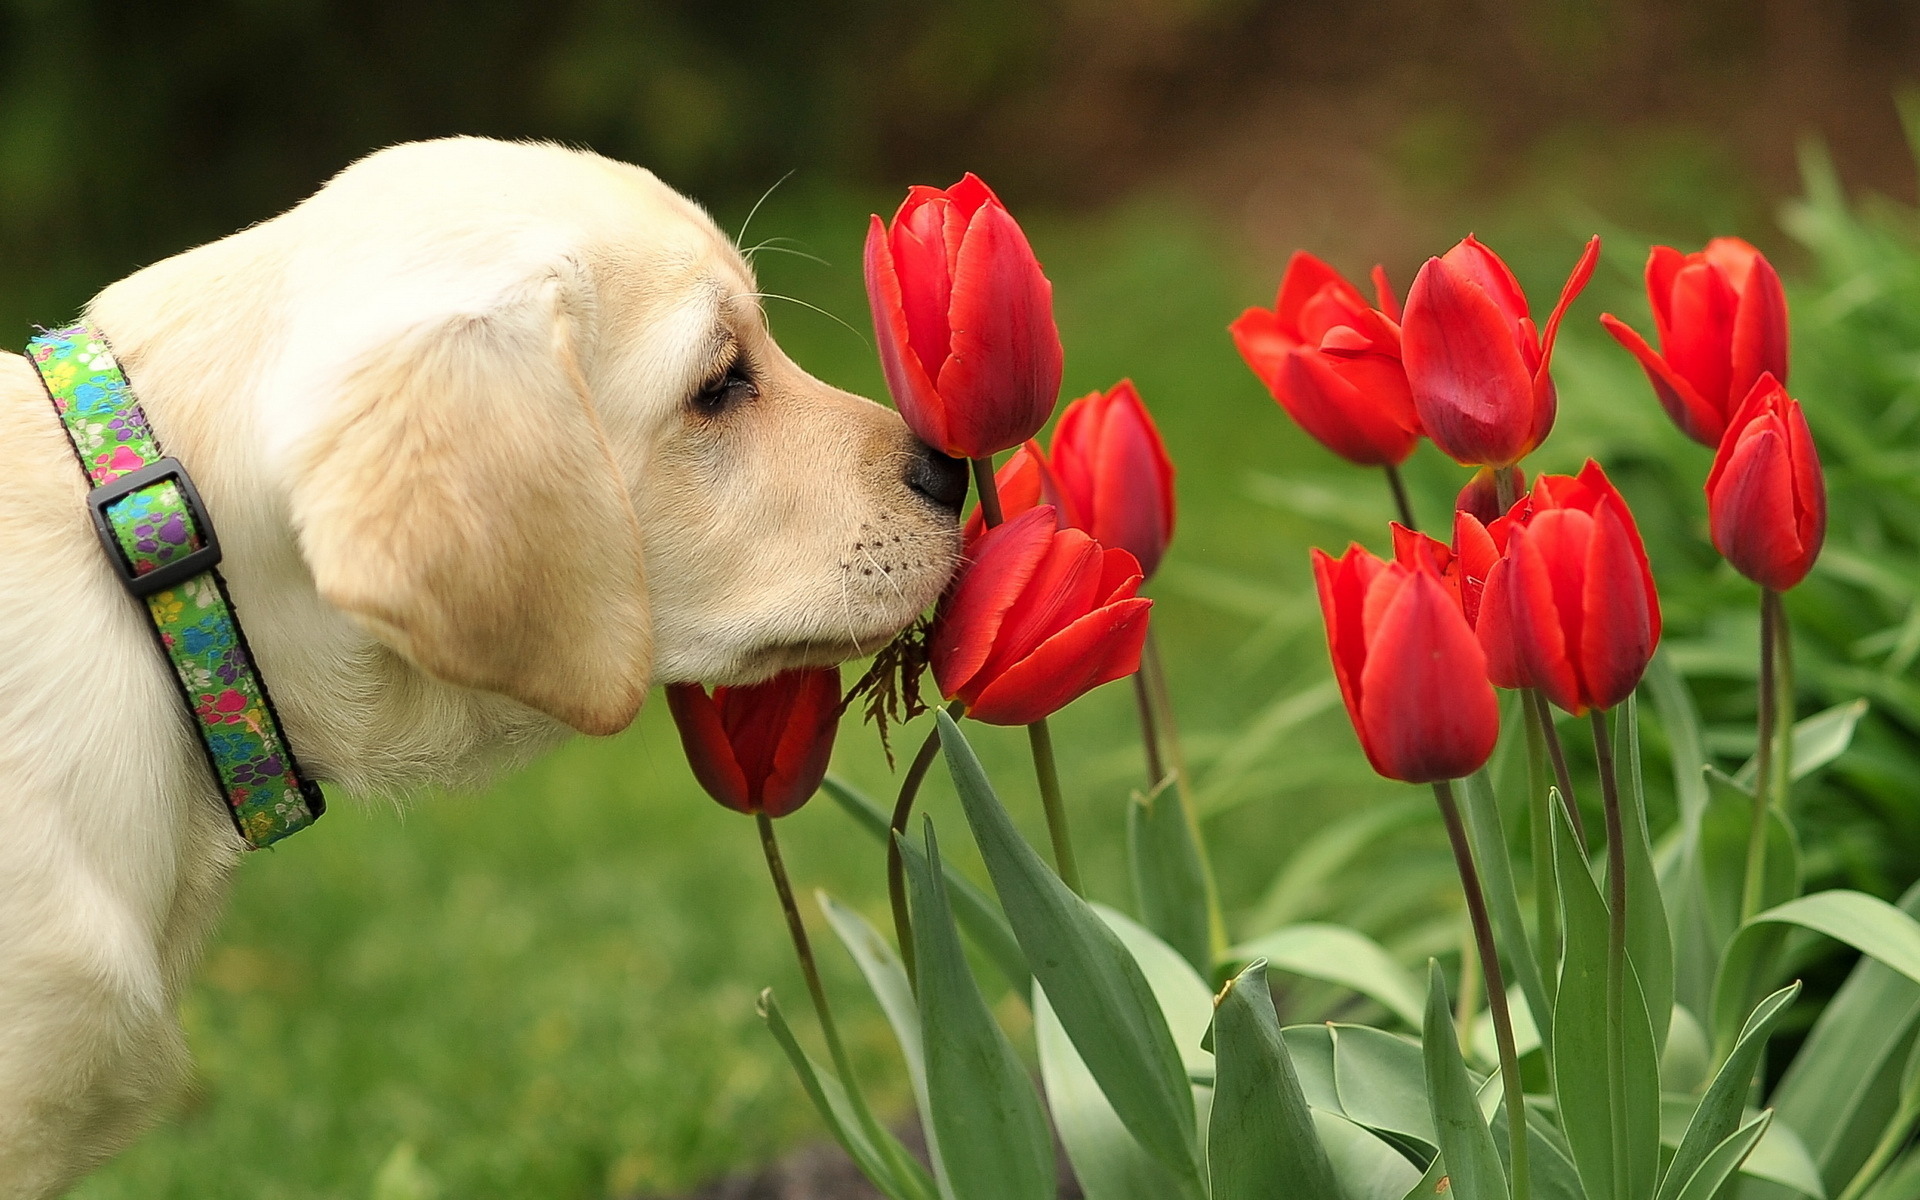 Dog and red tulips 1920 x 1200 Animals Photography MIRIADNA